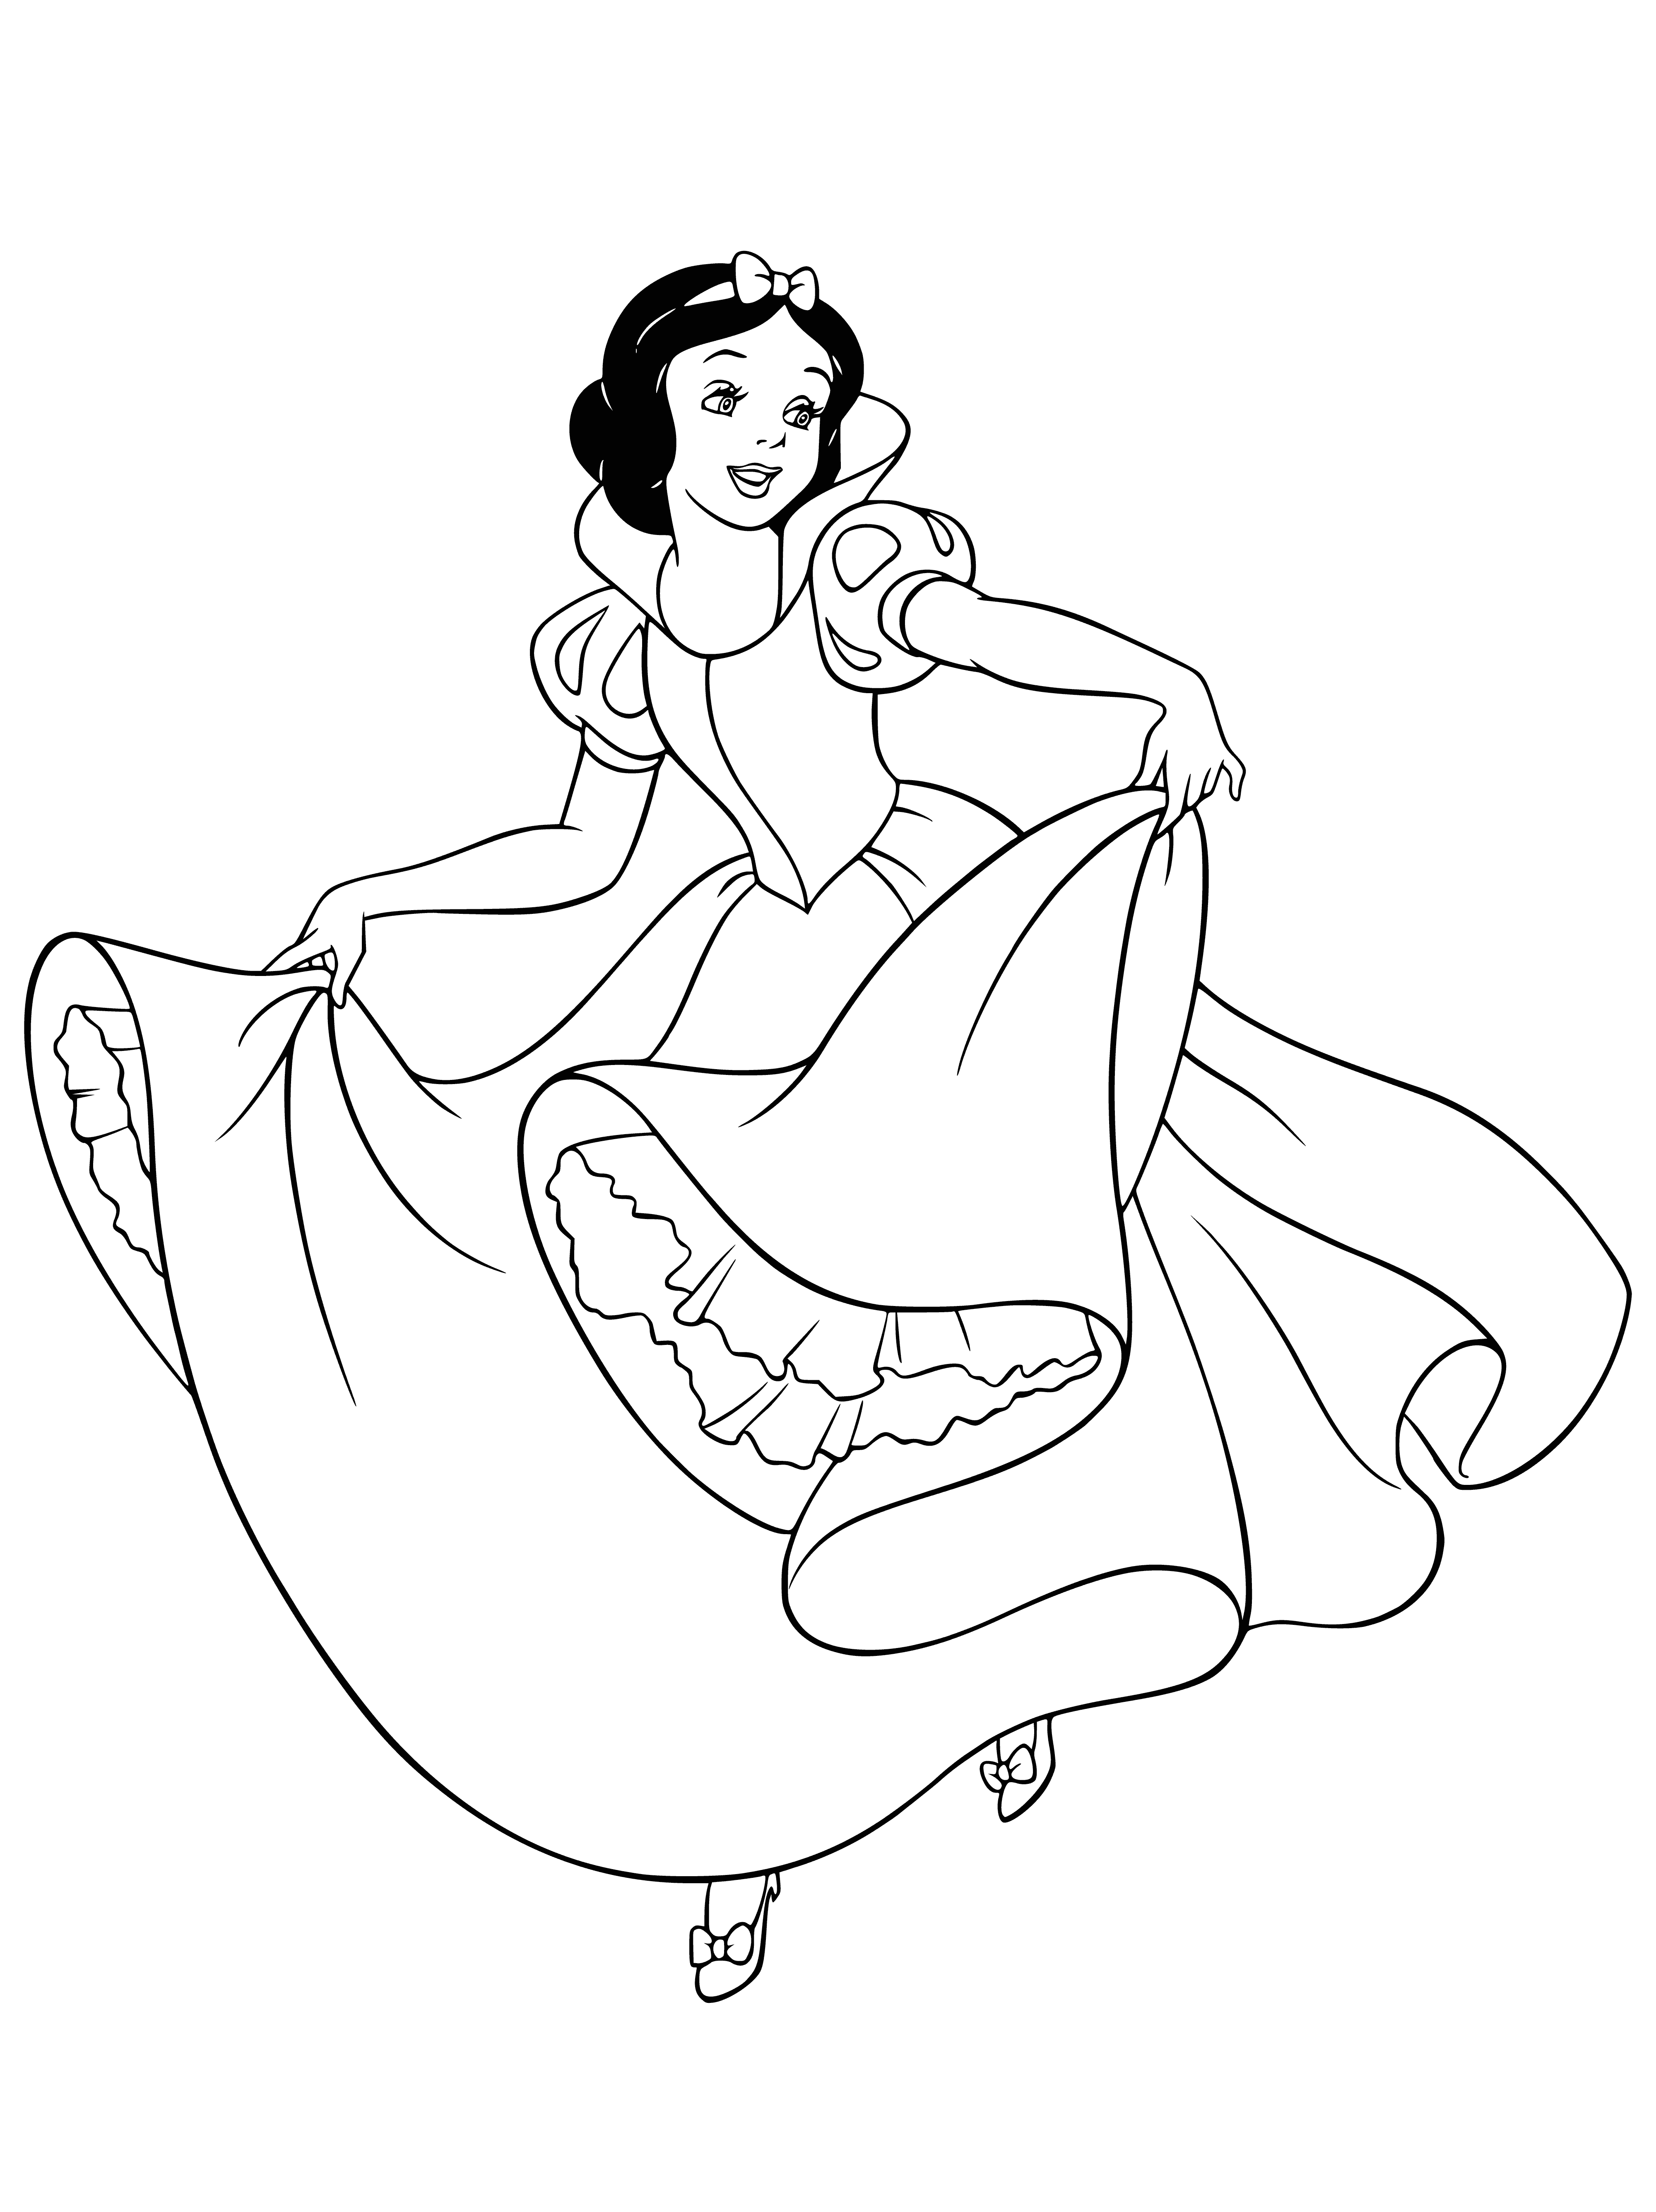 coloring page: Snow White dances with seven dwarfs in a forest clearing, wearing a flowy white dress and her hair loose. The dwarfs watch her, smiling as she laughs and enjoys herself.